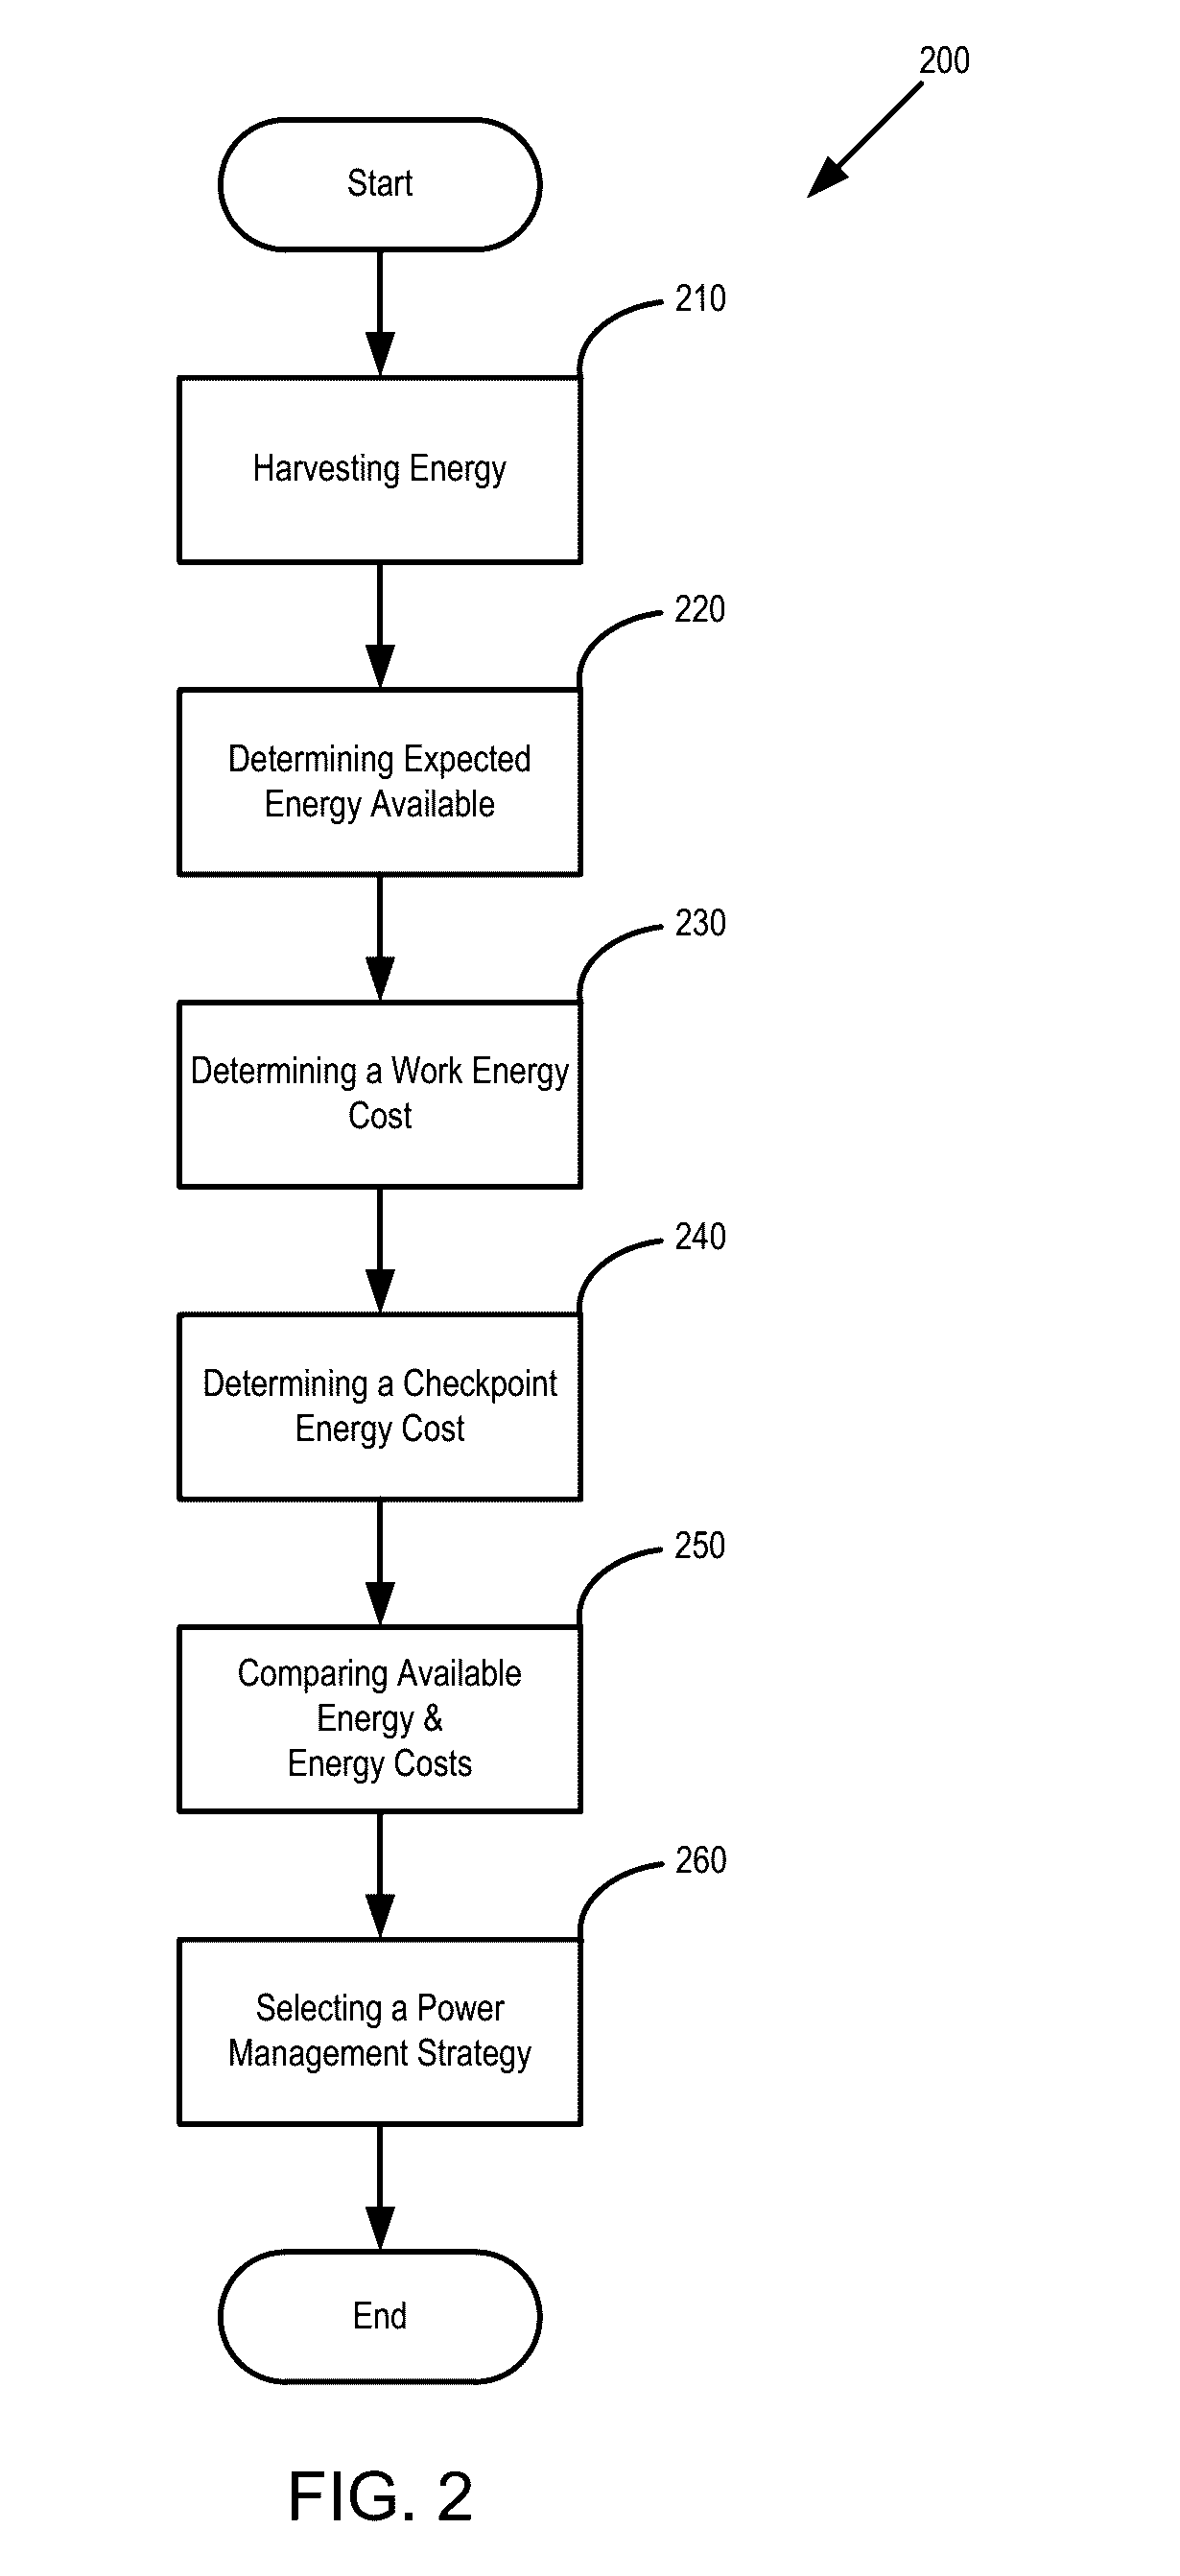 Opportunistic power management for managing intermittent power available to data processing device having semi-non-volatile memory or non-volatile memory